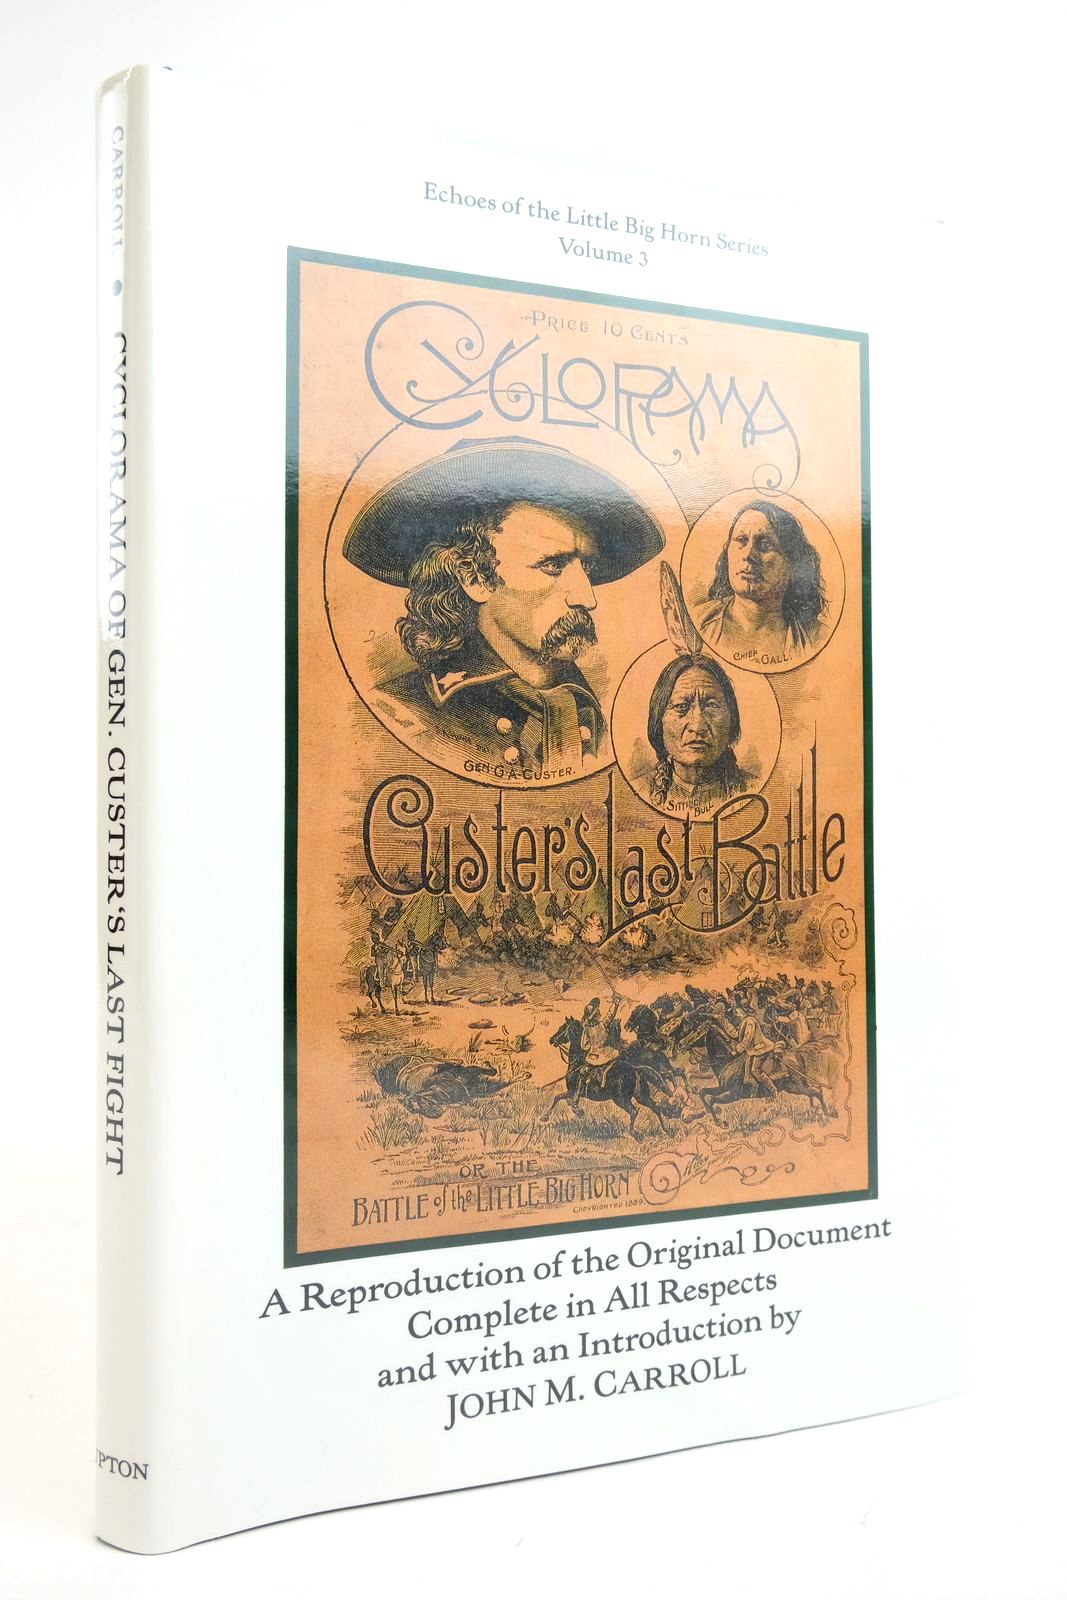 Photo of CYCLORAMA OF GEN. CUSTER'S LAST FIGHT written by Carroll, John M.
Pohanka, Brian C. published by Upton & Sons (STOCK CODE: 2136598)  for sale by Stella & Rose's Books